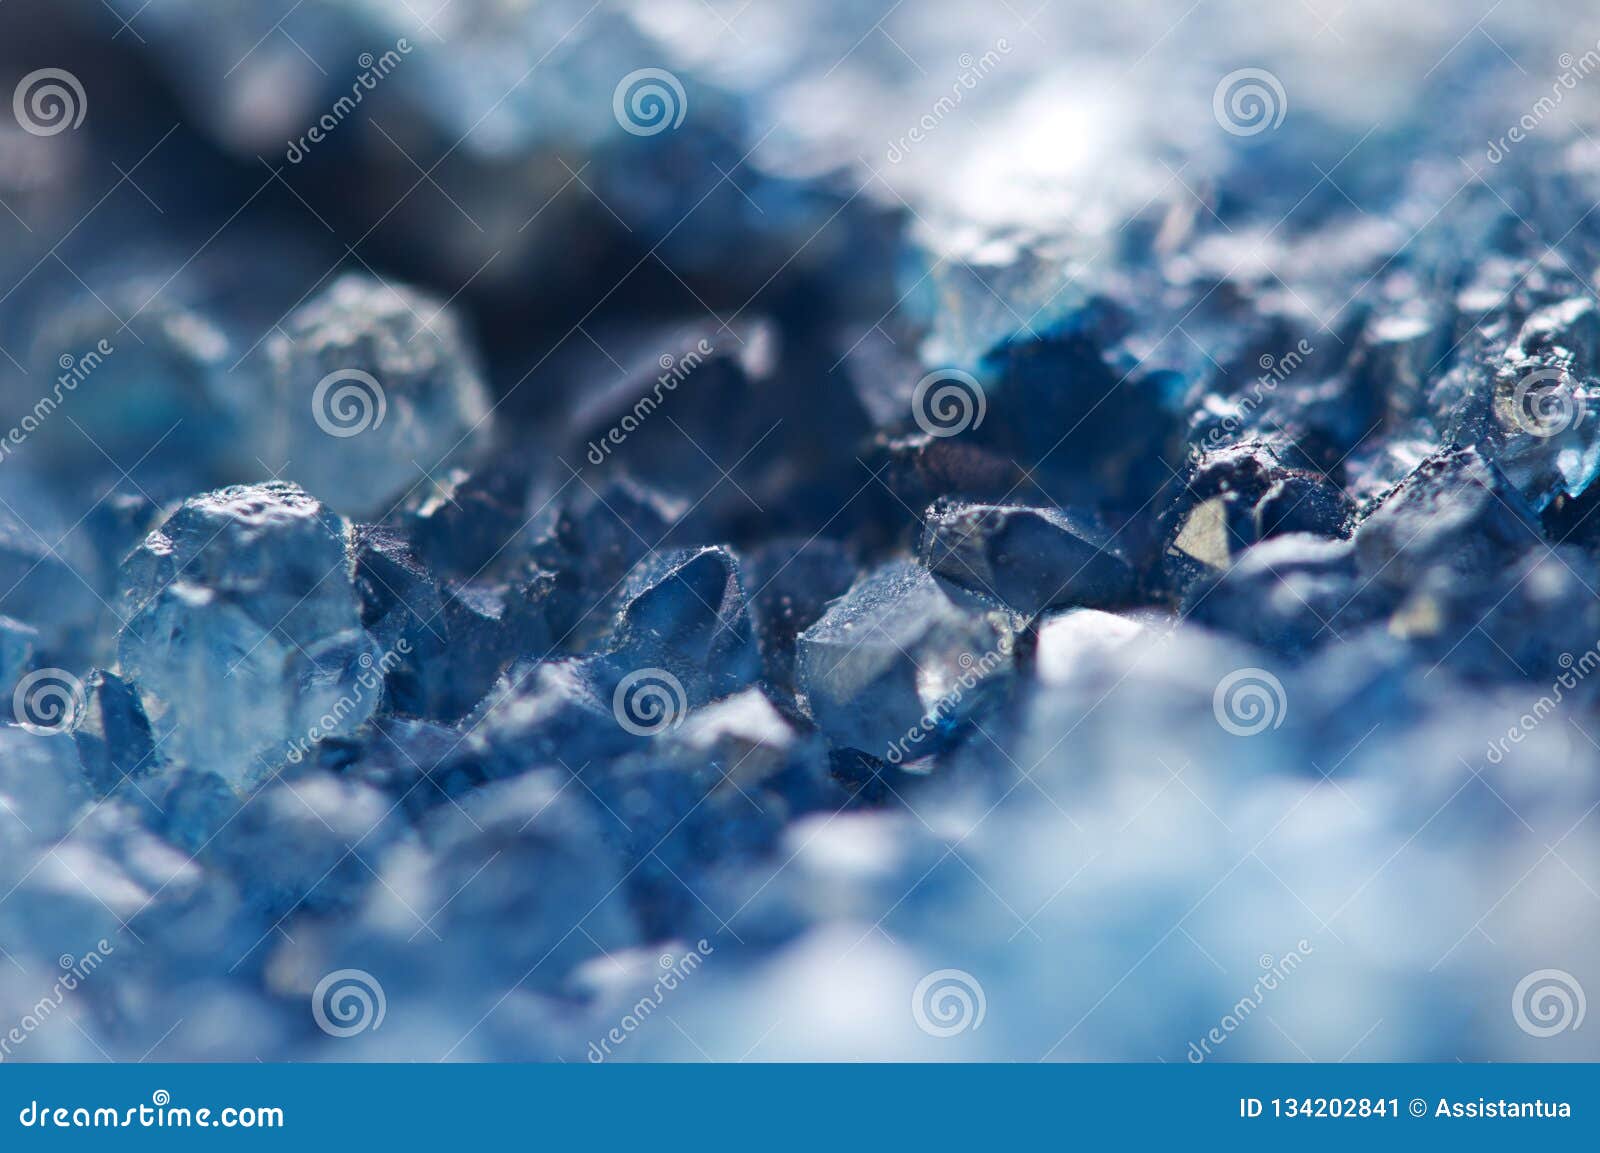 beautiful texture of blue crystals. mineral its blurred natural background. winter beautiful background.